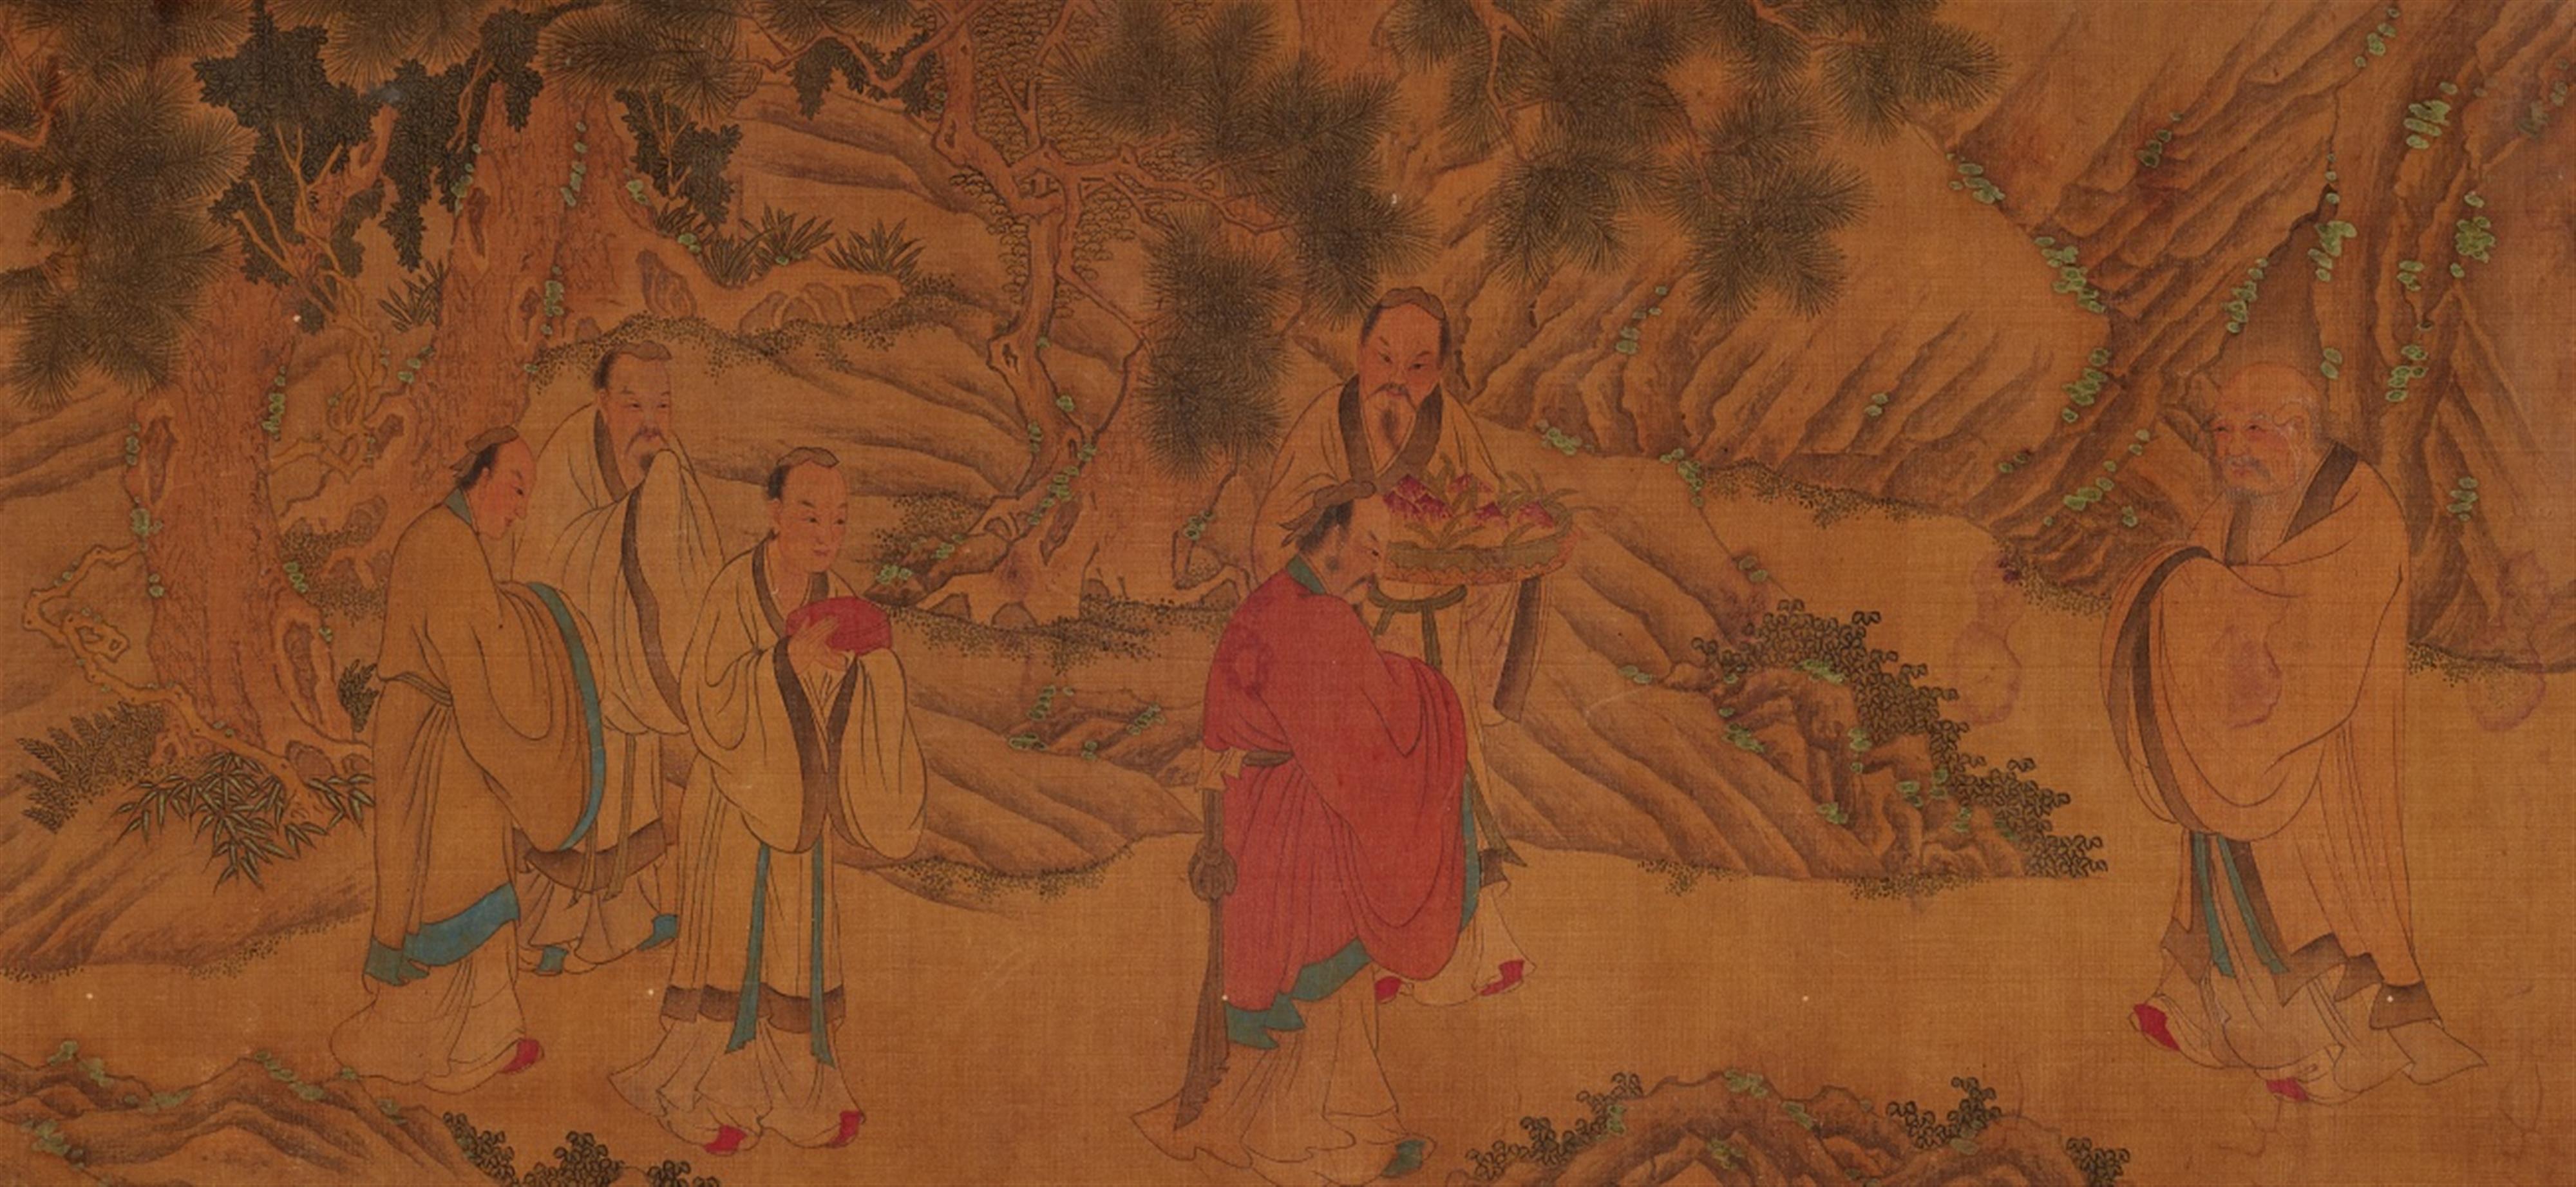 Various artists
Liu Songnian, in the manner of, and - Three horizontal scrolls. Ink and colour on paper and silk. a) Daoist figures. Inscribed Songnian and sealed. b) Six round fan paintings mounted on a scroll. c) People from dist... - image-1